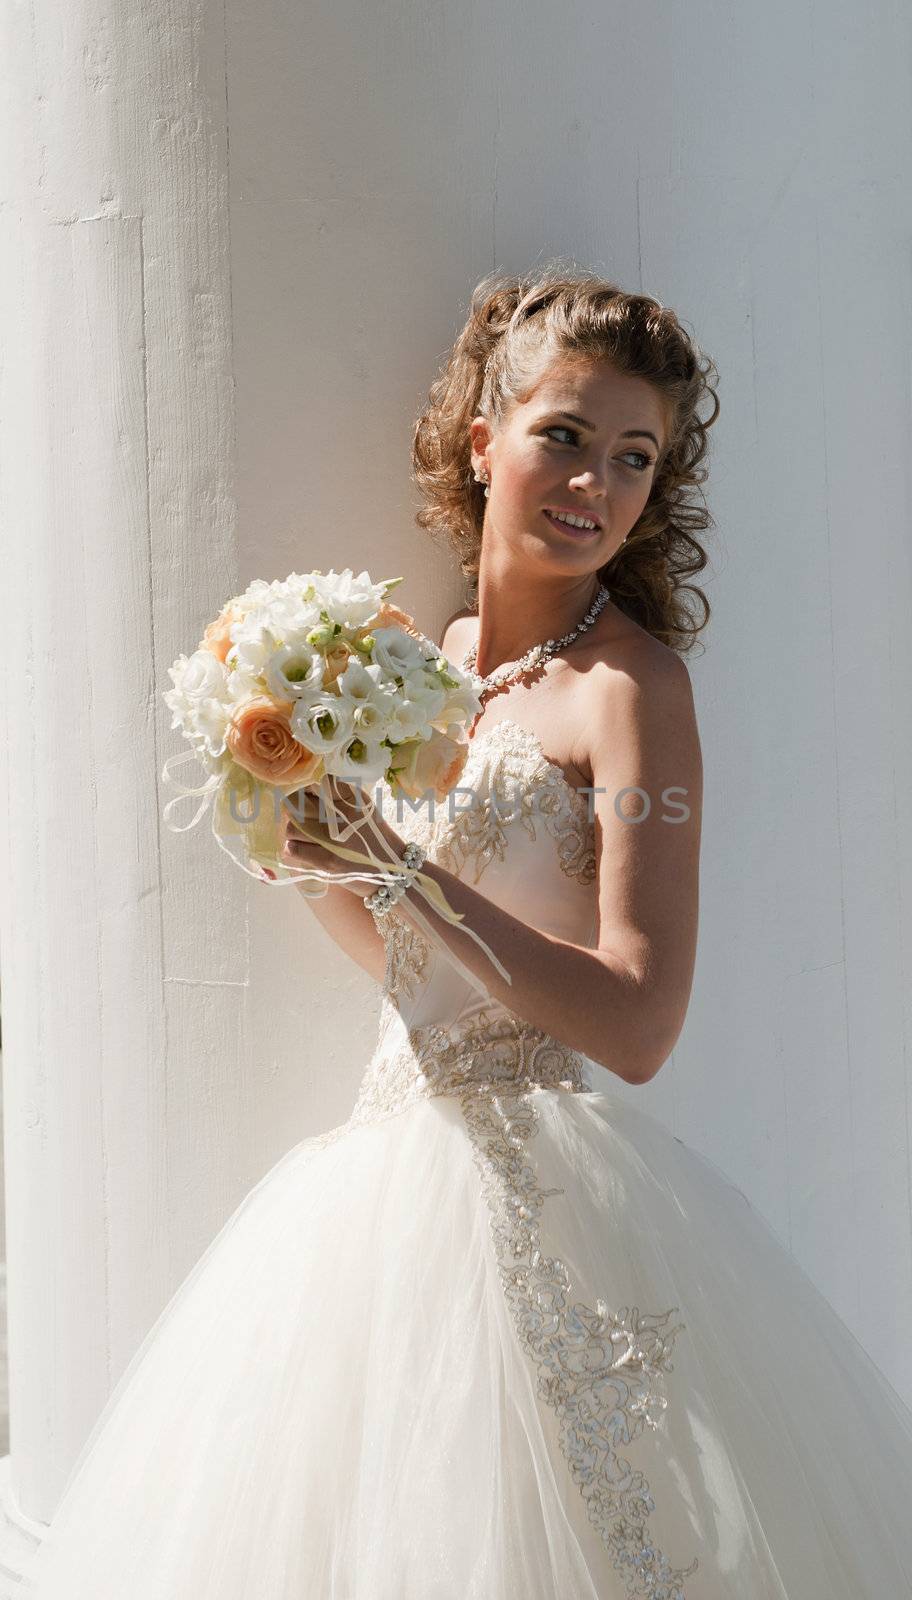 The bride with a bouquet. The bride in a wedding dress with a bouquet on the white.